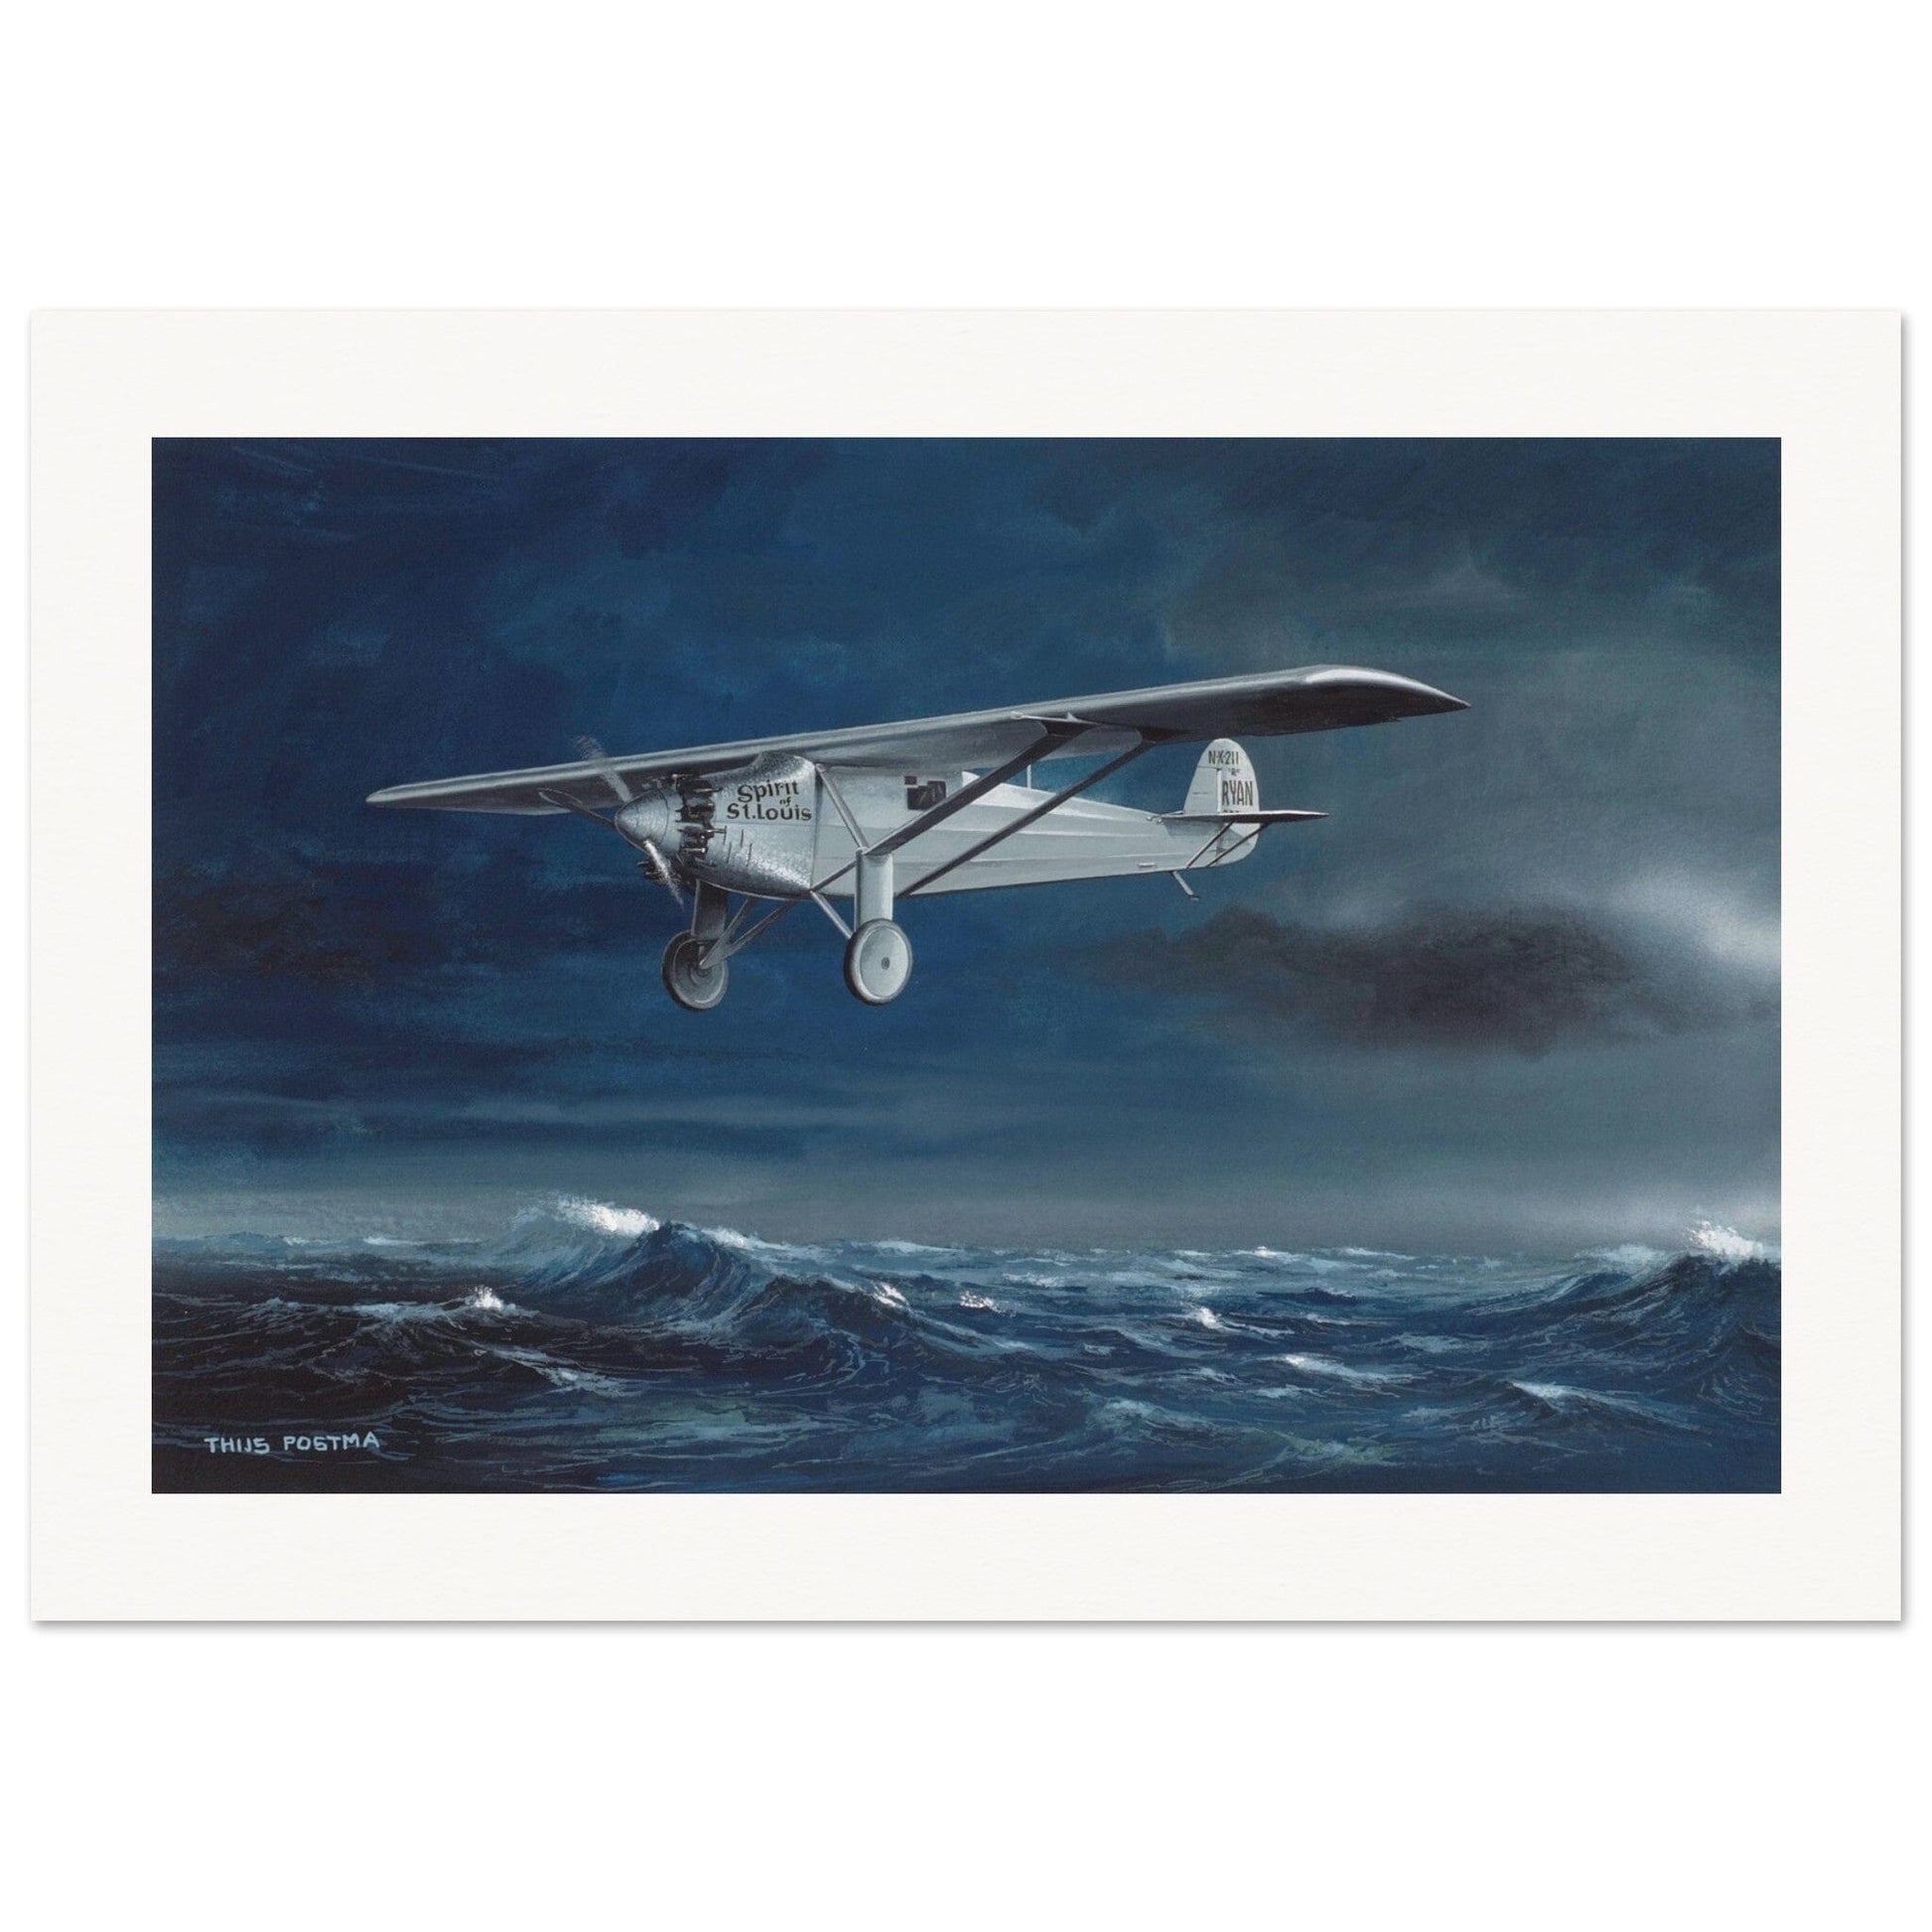 Thijs Postma - Poster - Charles Lindbergh Spirit of St. Louis 1927 Poster Only TP Aviation Art 70x100 cm / 28x40″ 